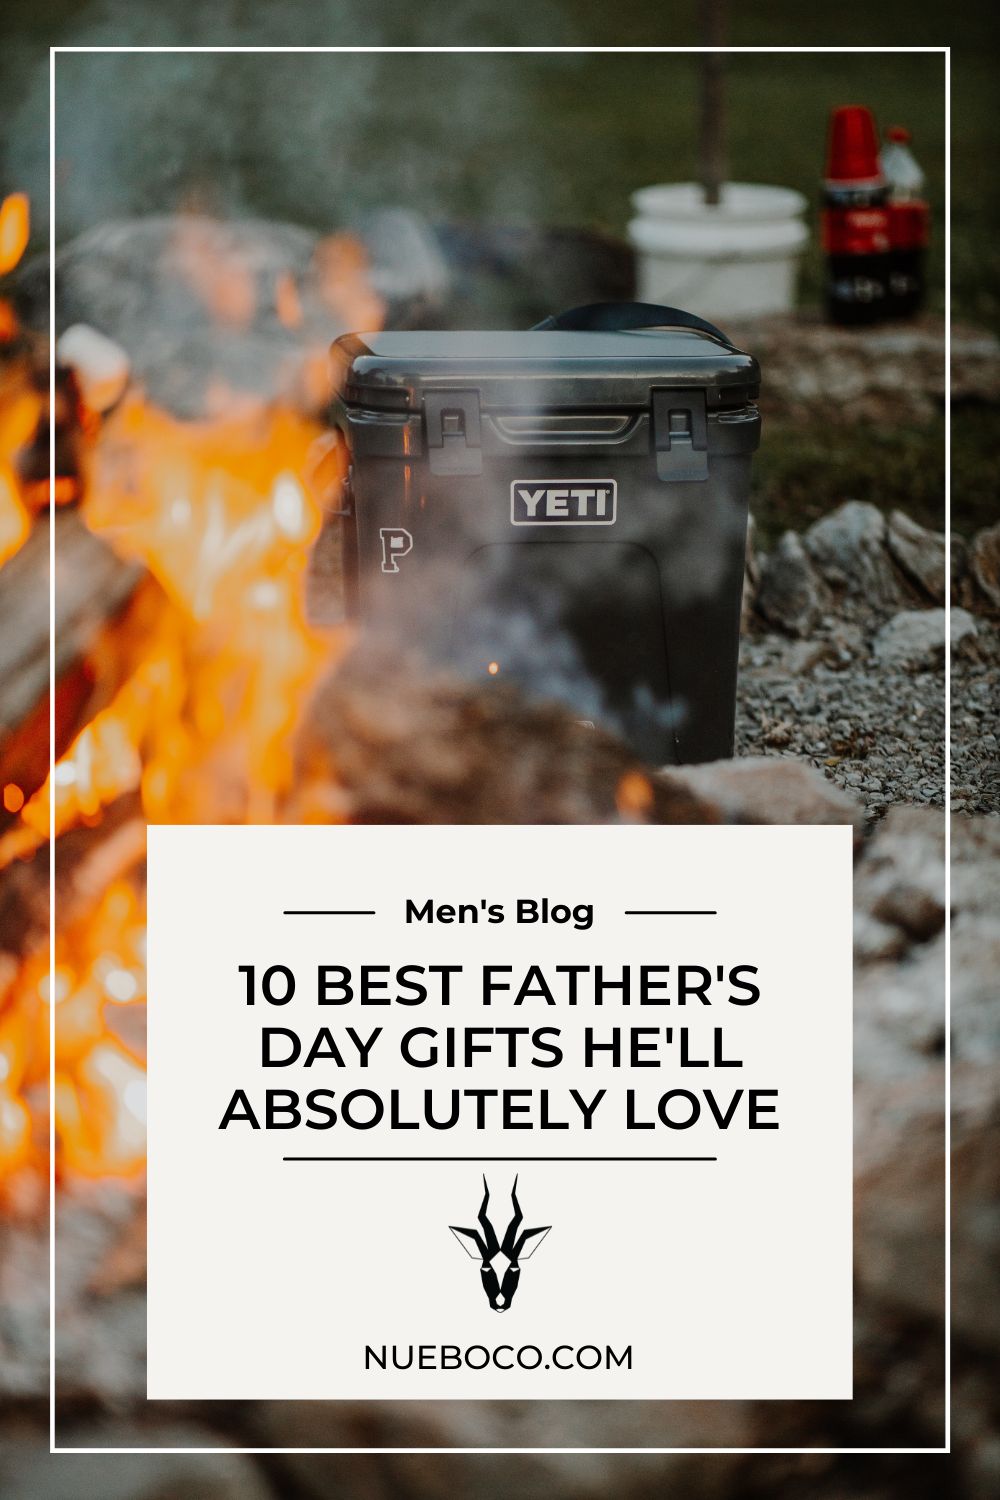 10 Best Father's Day Gifts He'll Absolutely Love